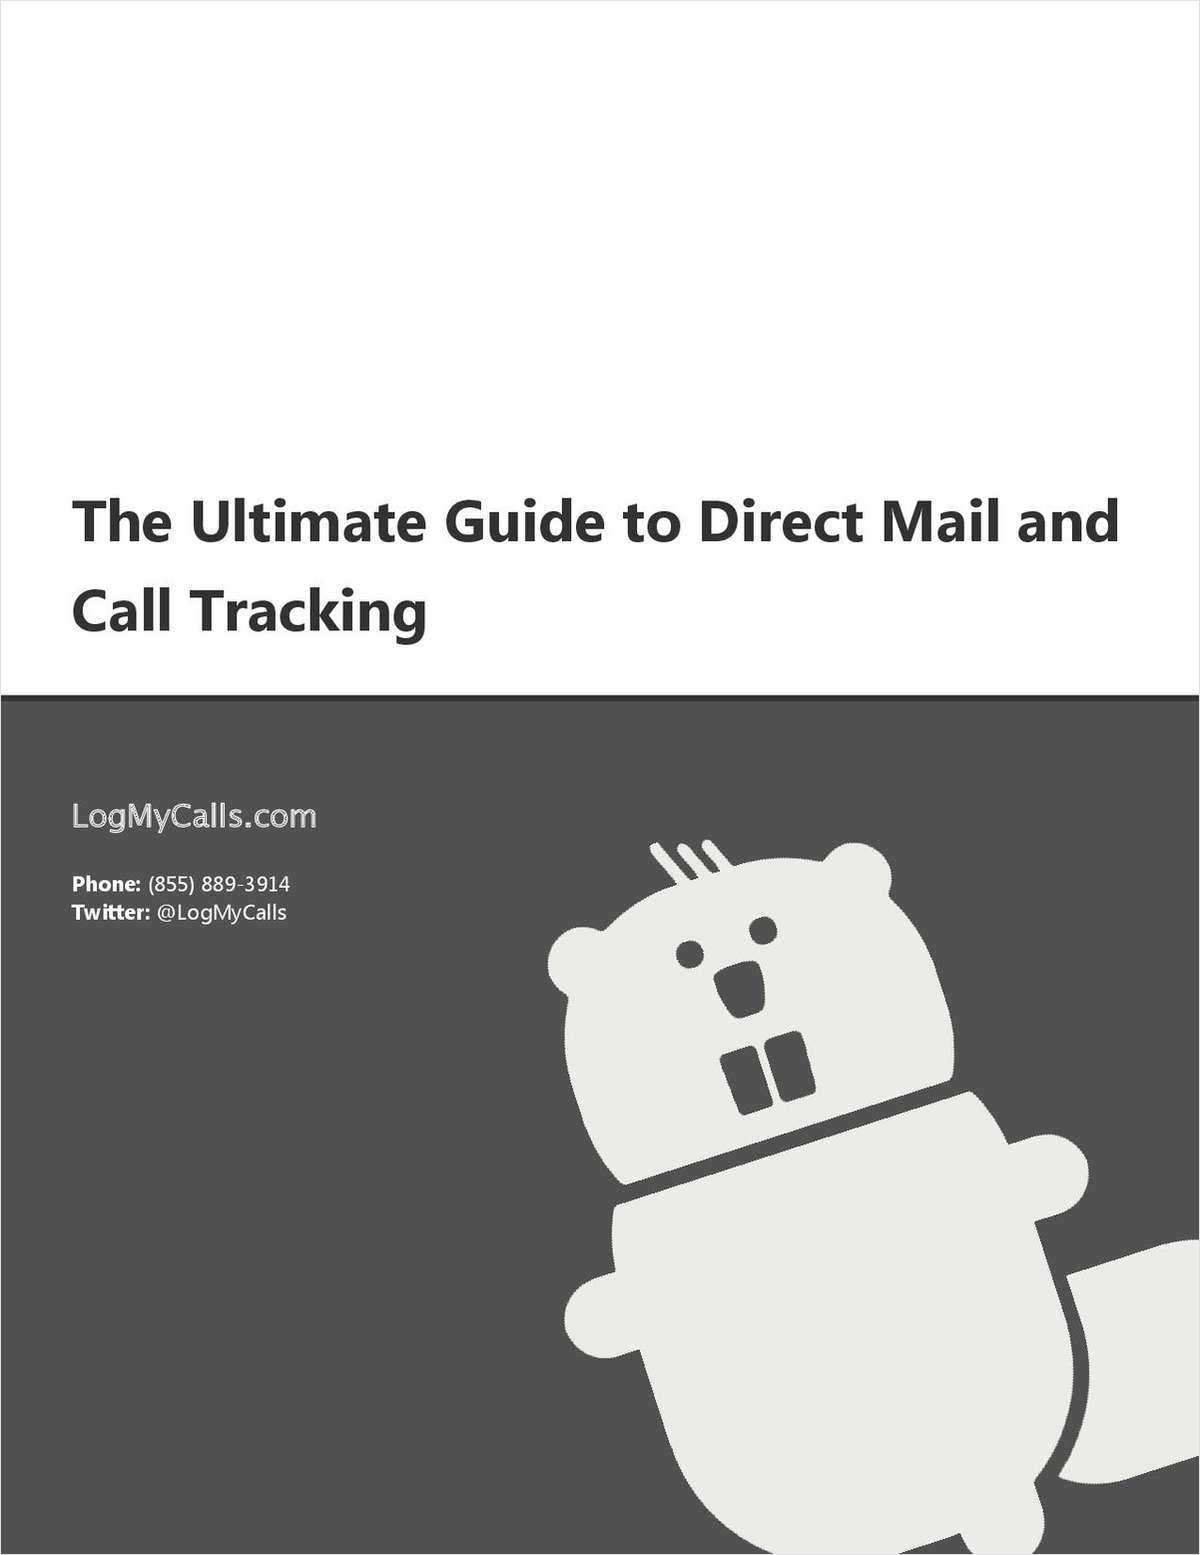 The Ultimate Guide to Direct Mail and Call Tracking